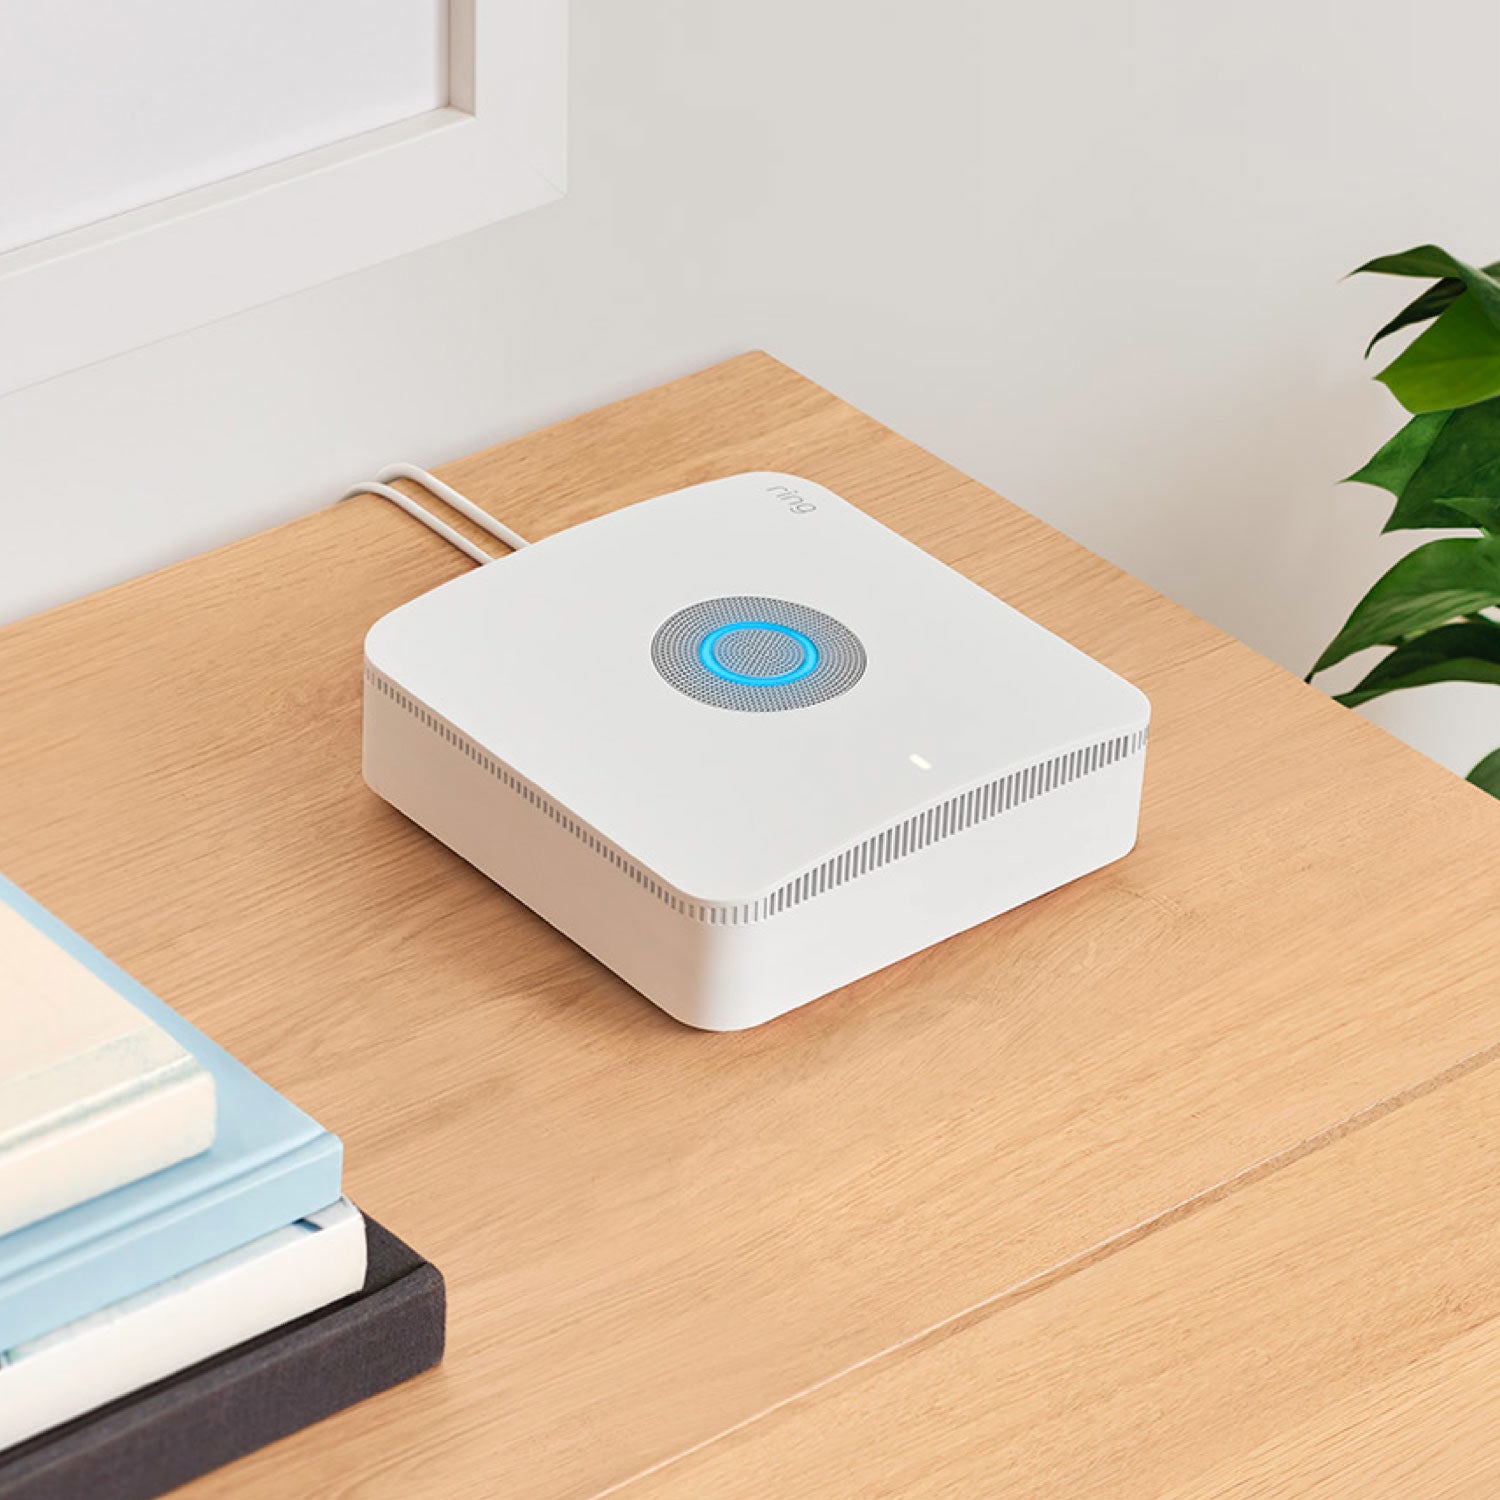 Alarm Pro Base Station (for with built-in eero Wi-Fi 6 router) - Alarm Pro Base Station situated on wooden desktop next to some books.